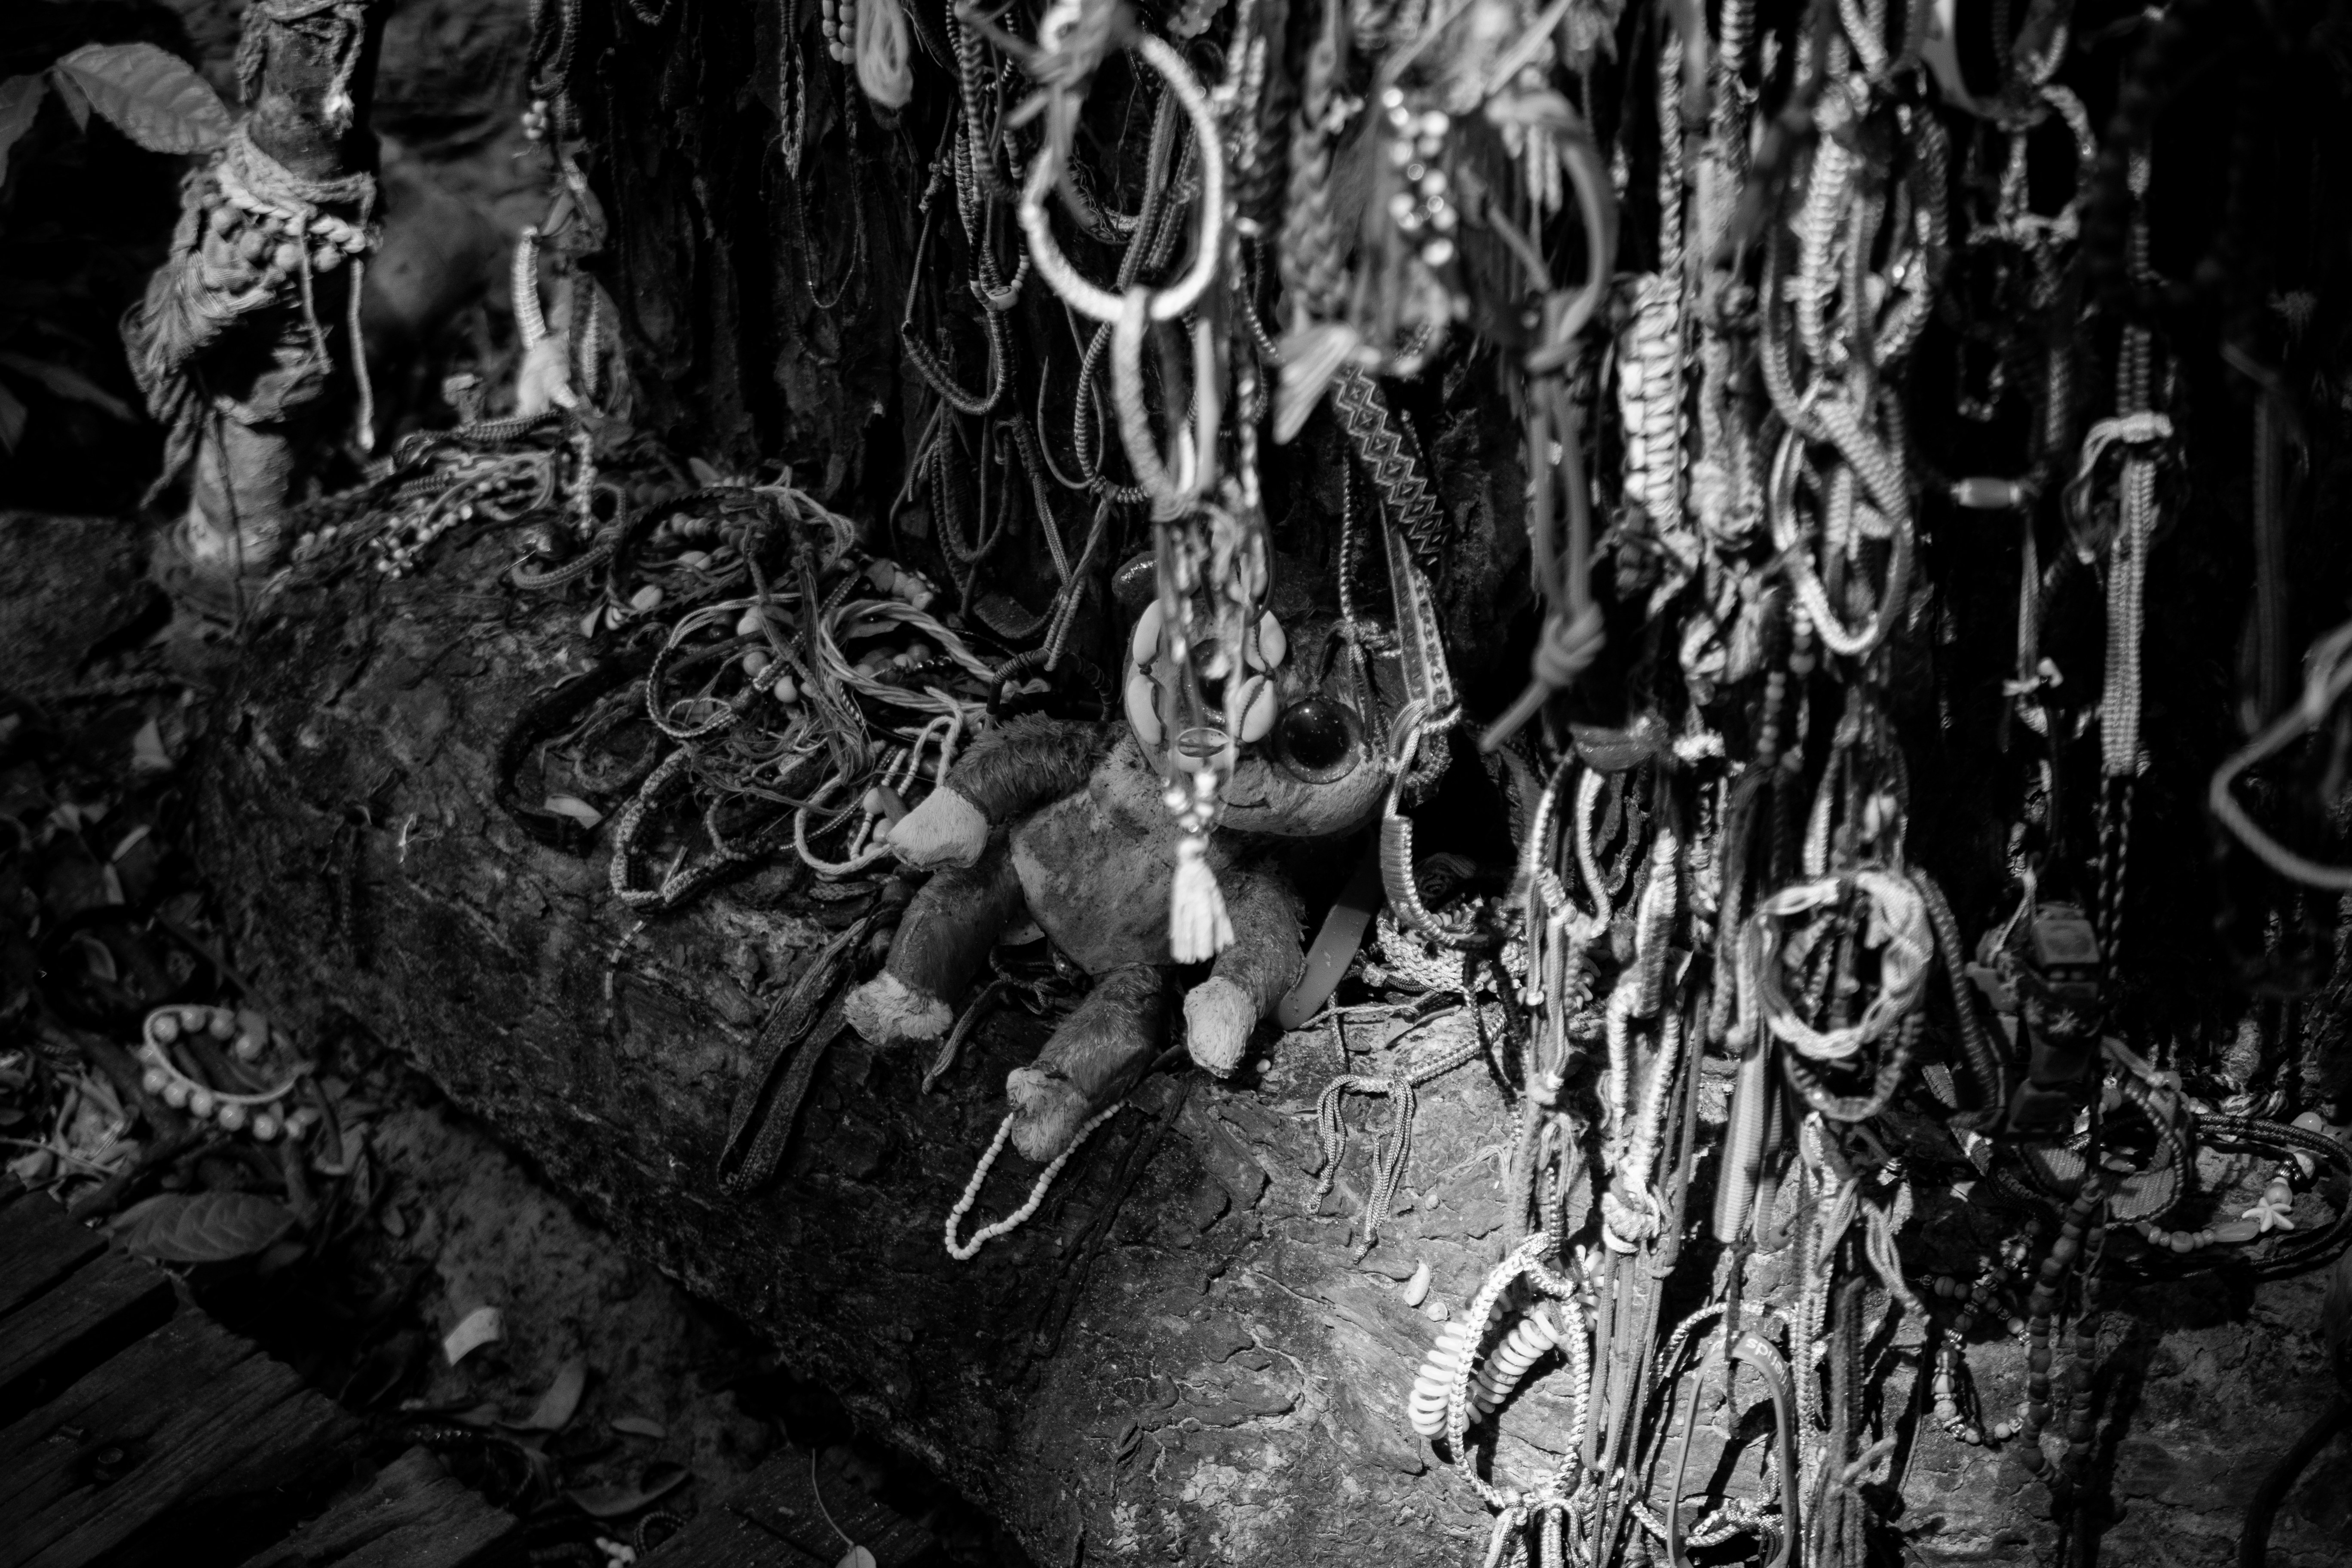 Bracelets of children executed at the Choeung Ek Genocide Center.